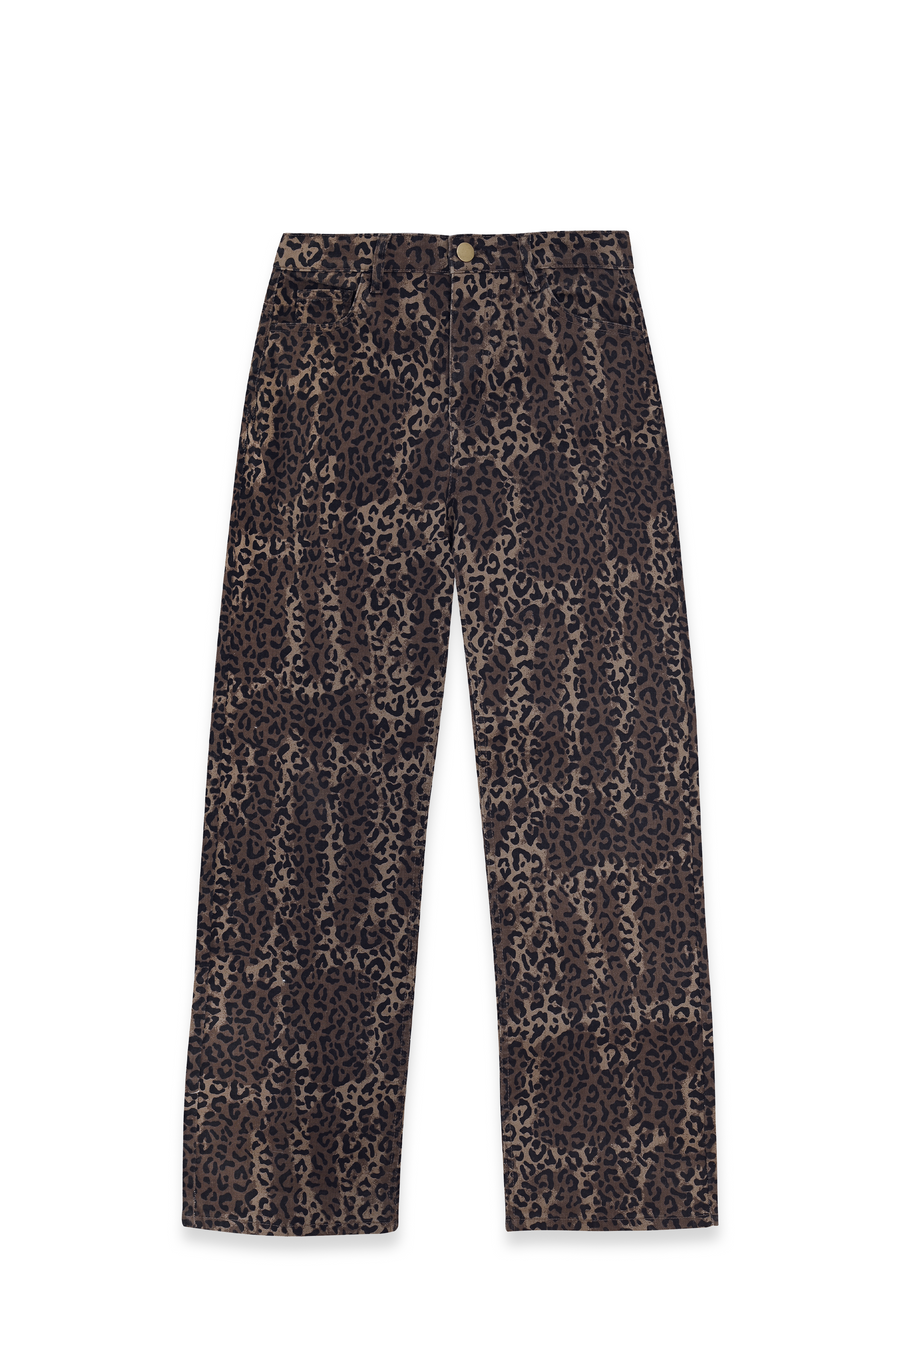 Catty Leopard Jeans